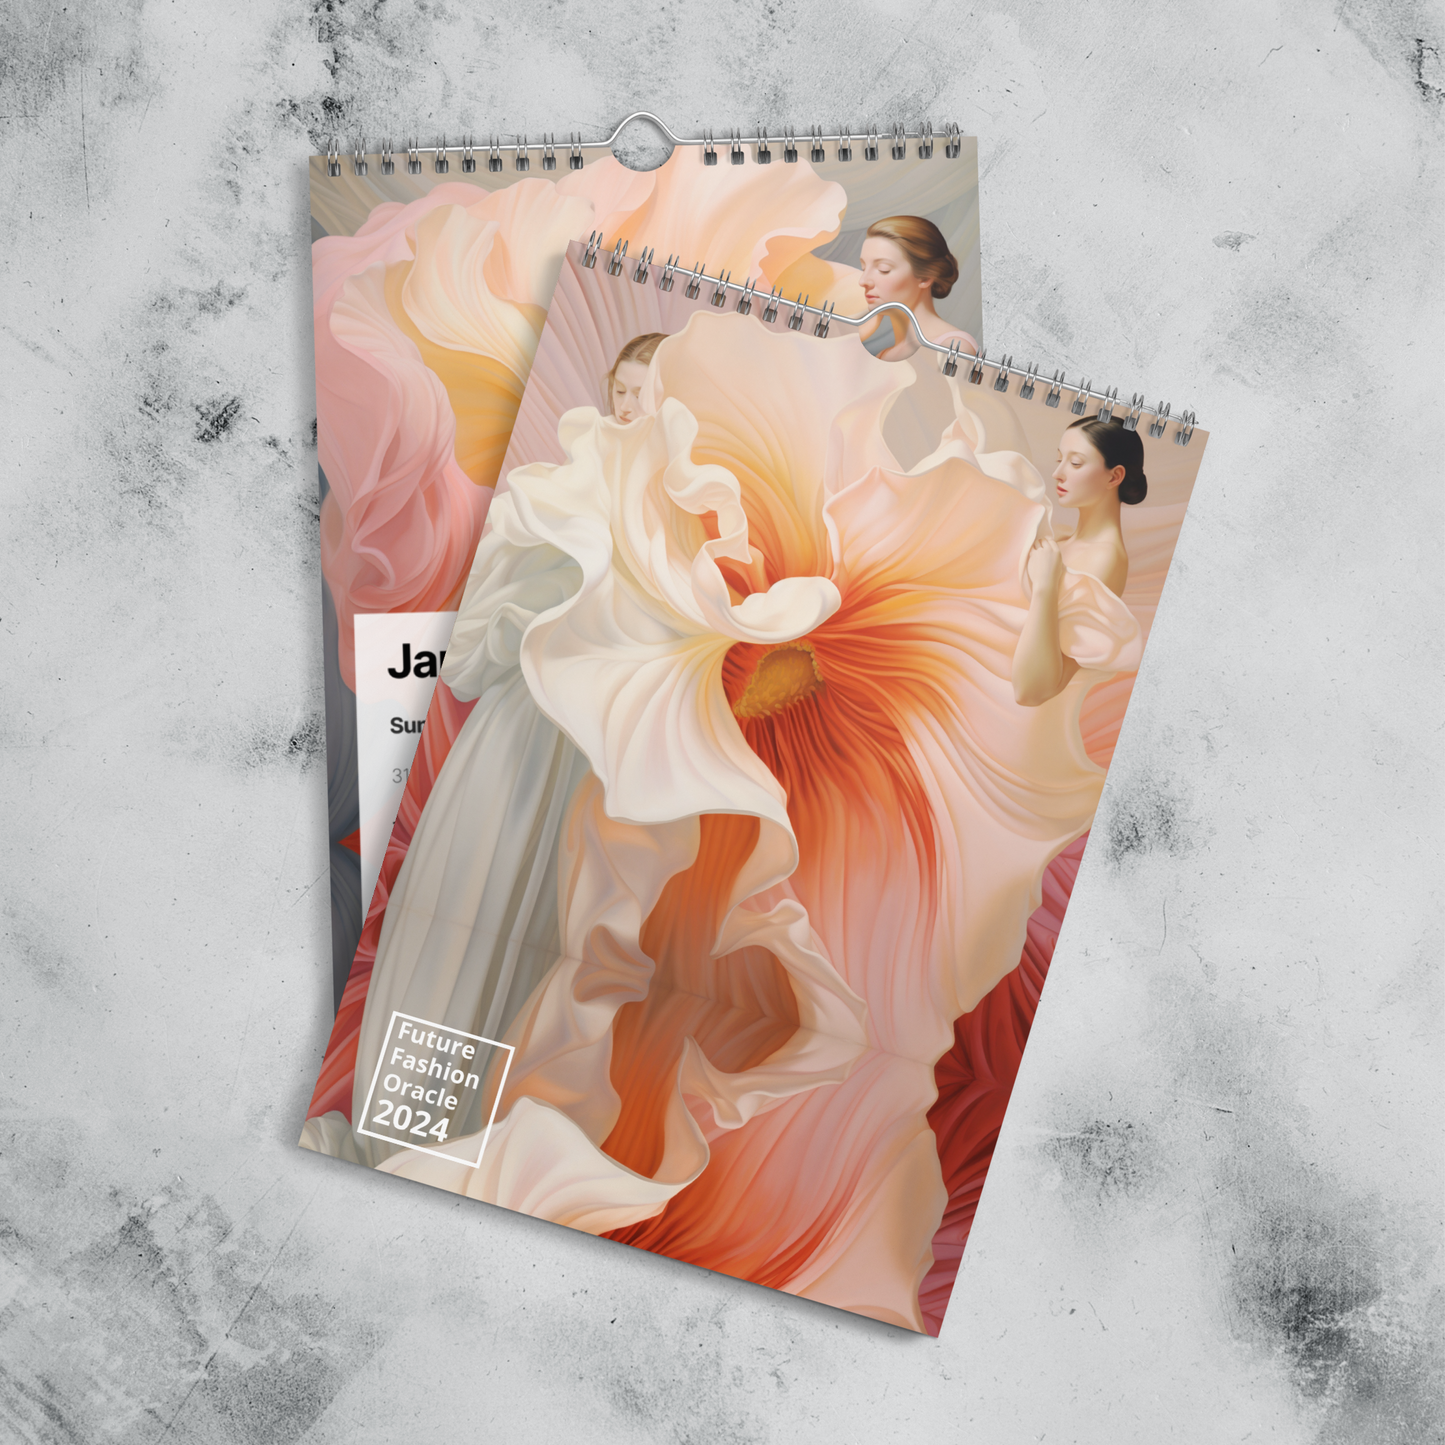 Flowers Are Magic - Wall calendar (2024) featuring important dates with an image of a flower.